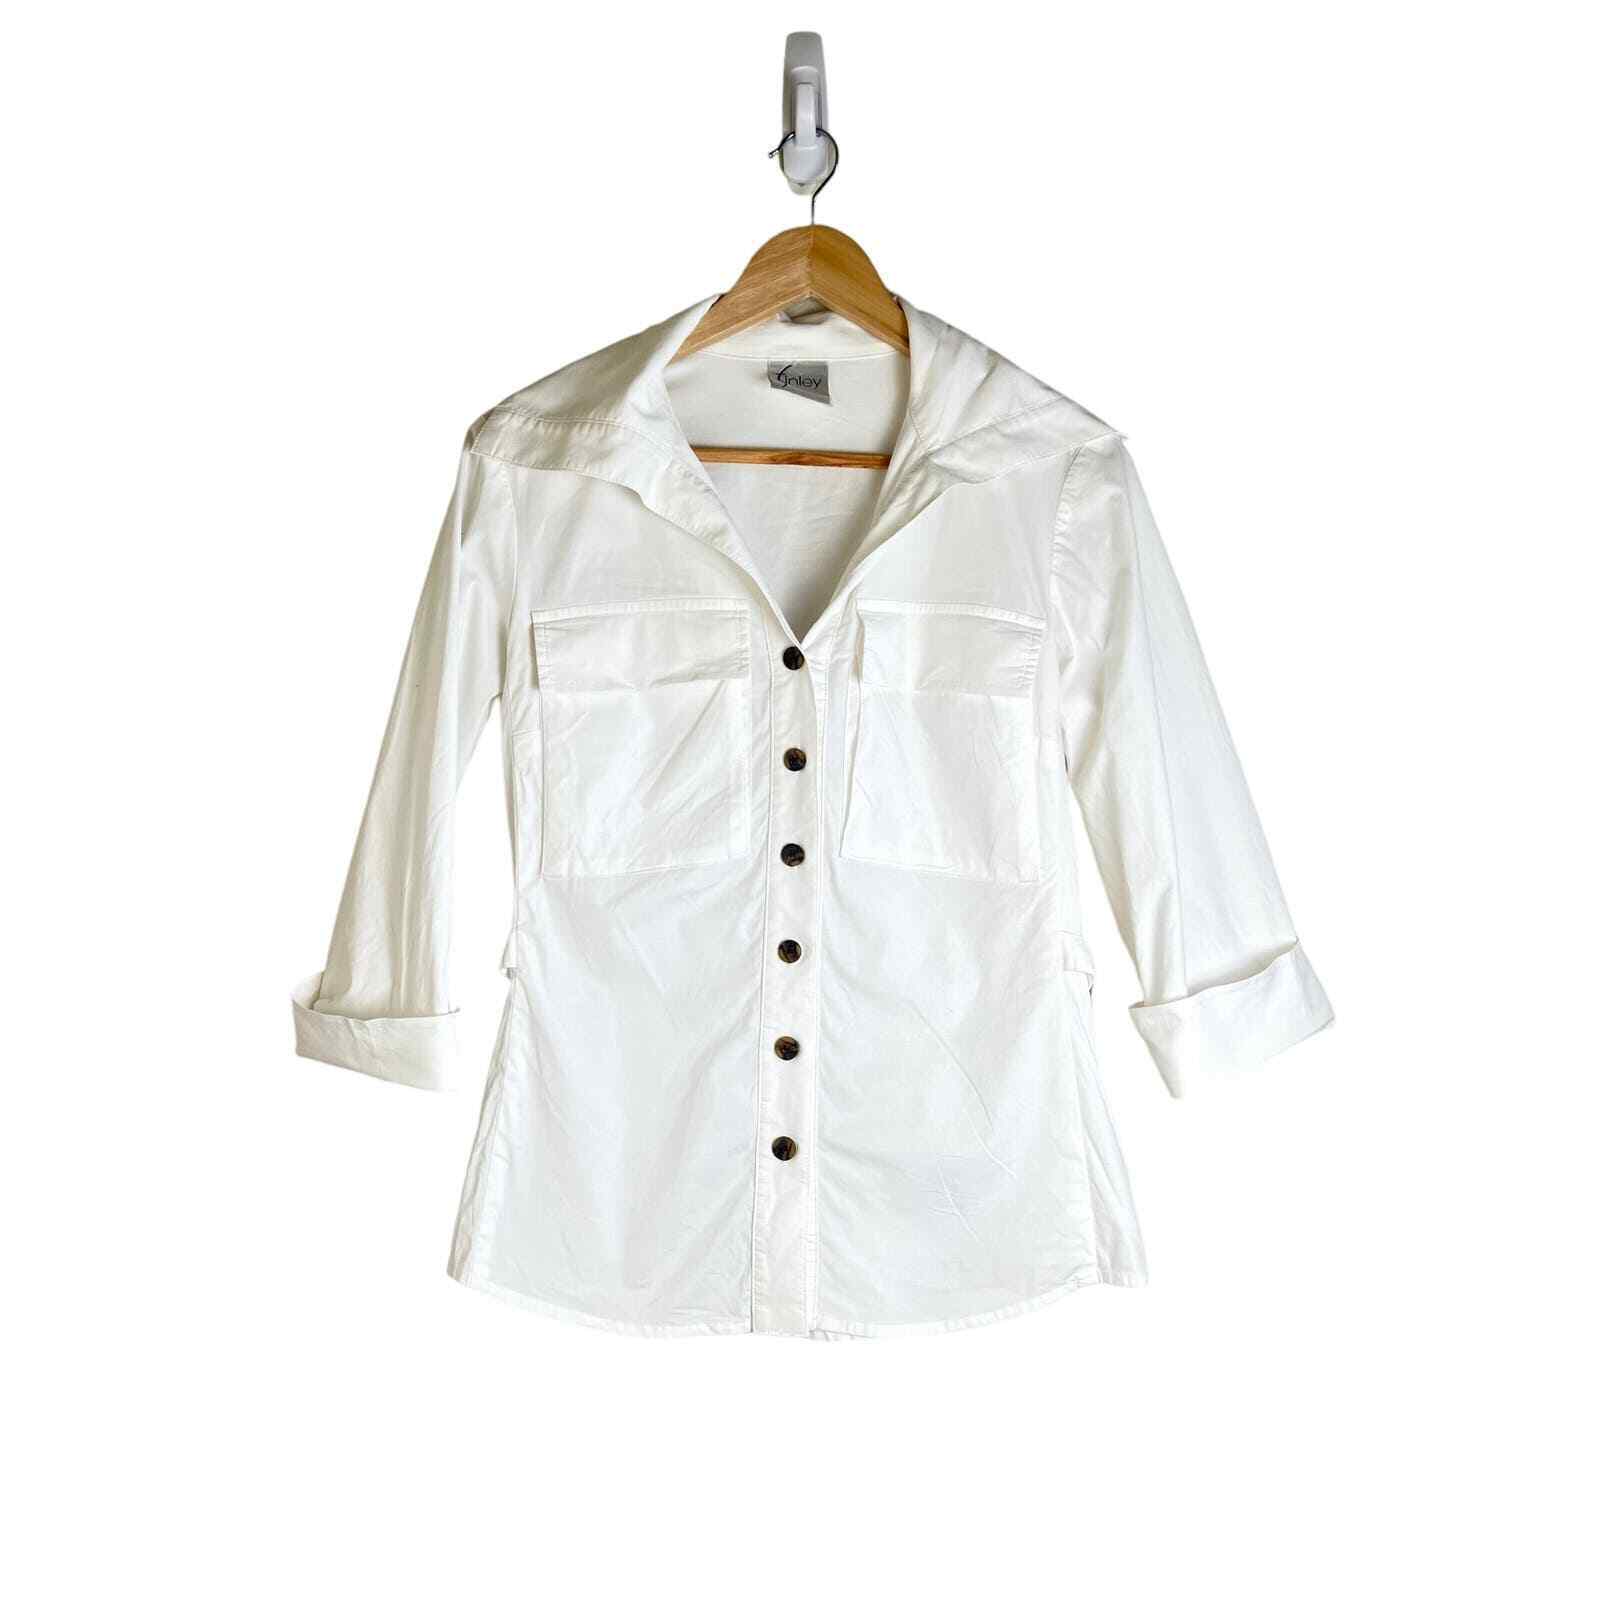 Finley Women’s White Cuffed Sleeve Casual Button Down Blouse Est. Size Small